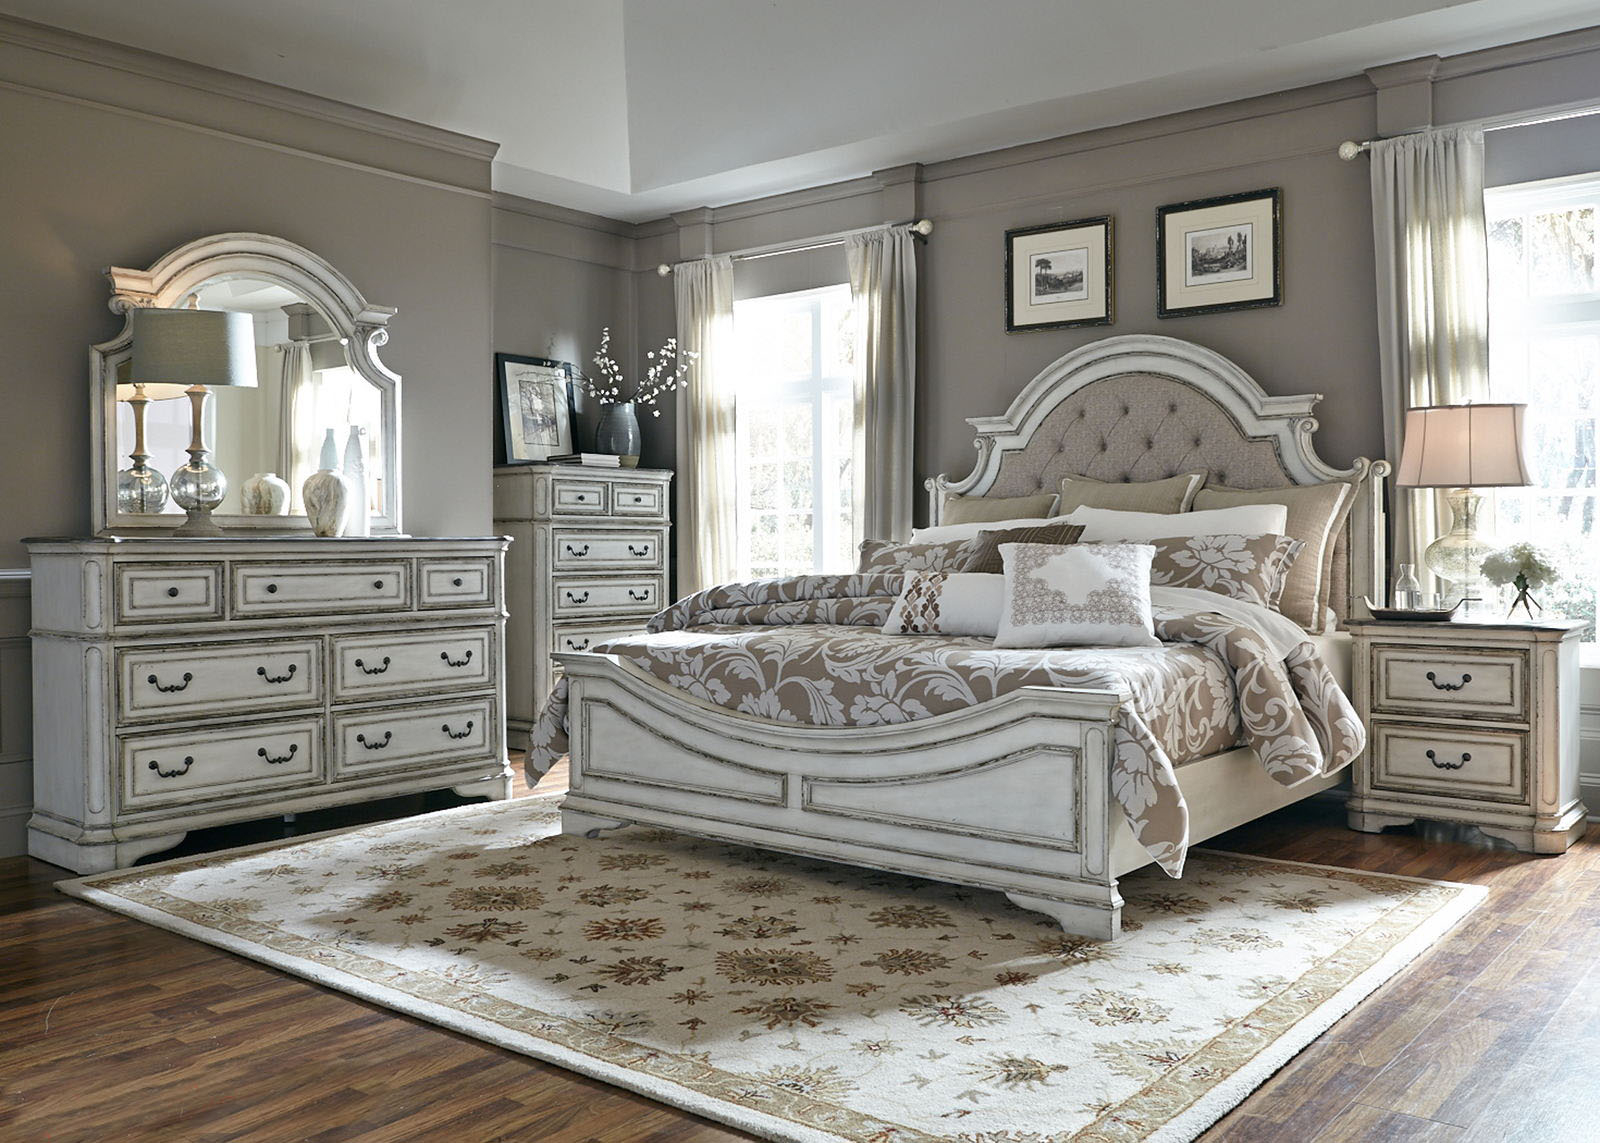 Liberty Magnolia Manor 4 Piece Upholstered Bedroom Set In Antique White Est Ship Time Is 4 Weeks within dimensions 1600 X 1143